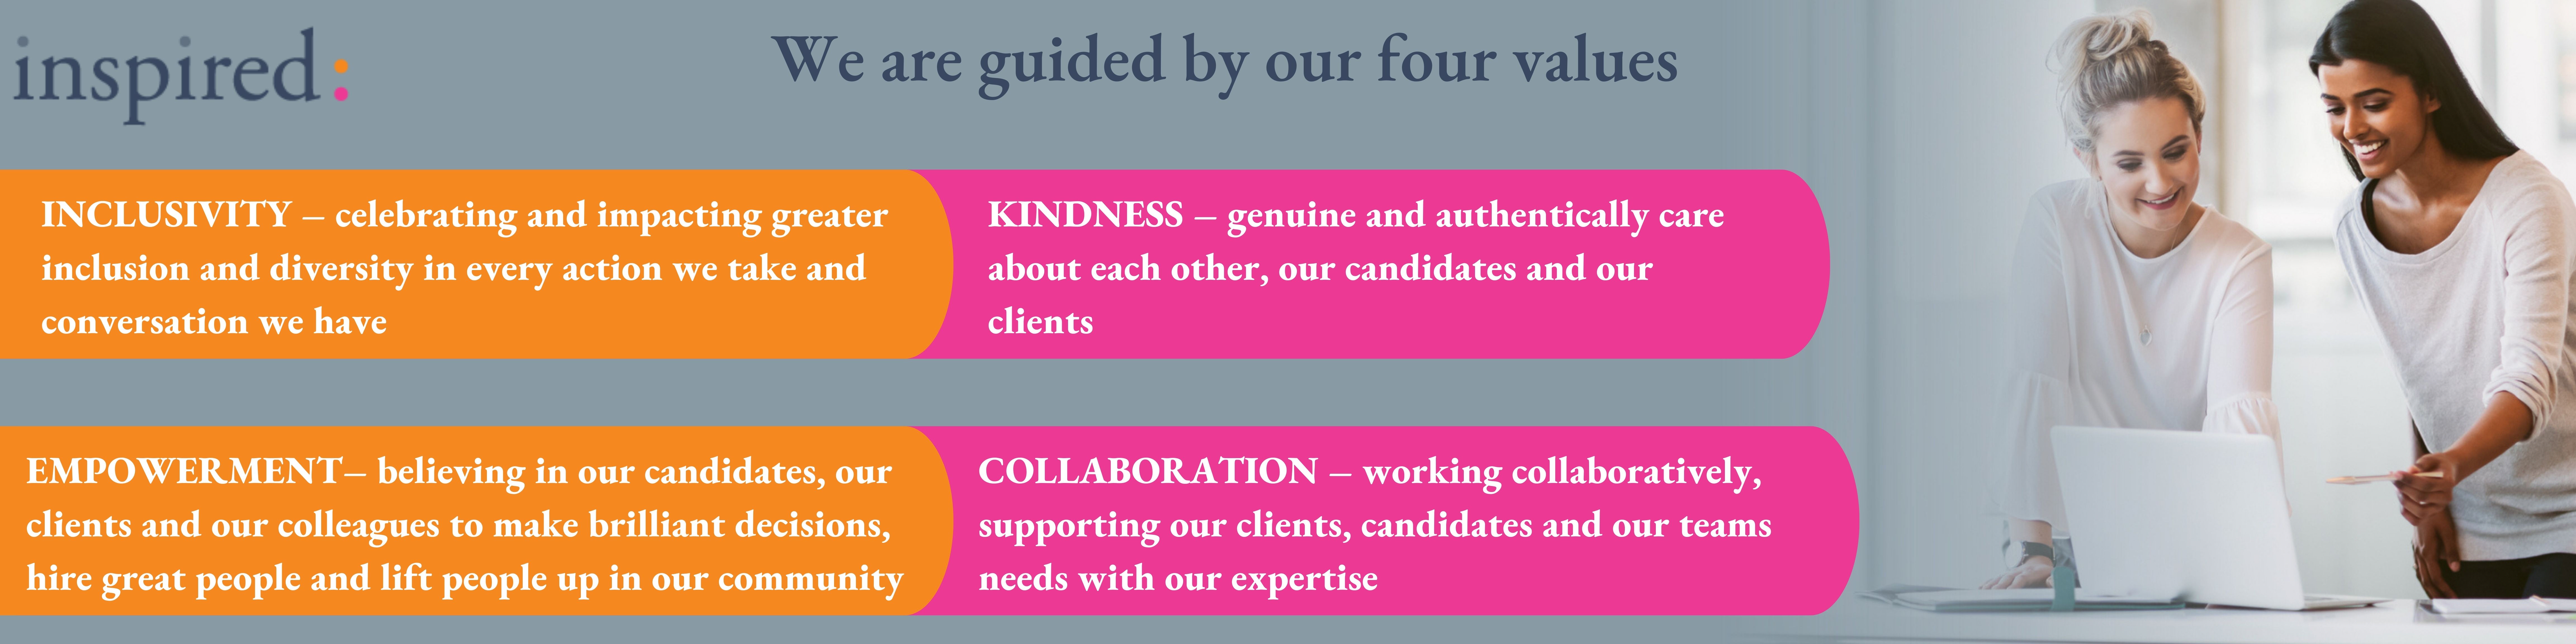 Our company values